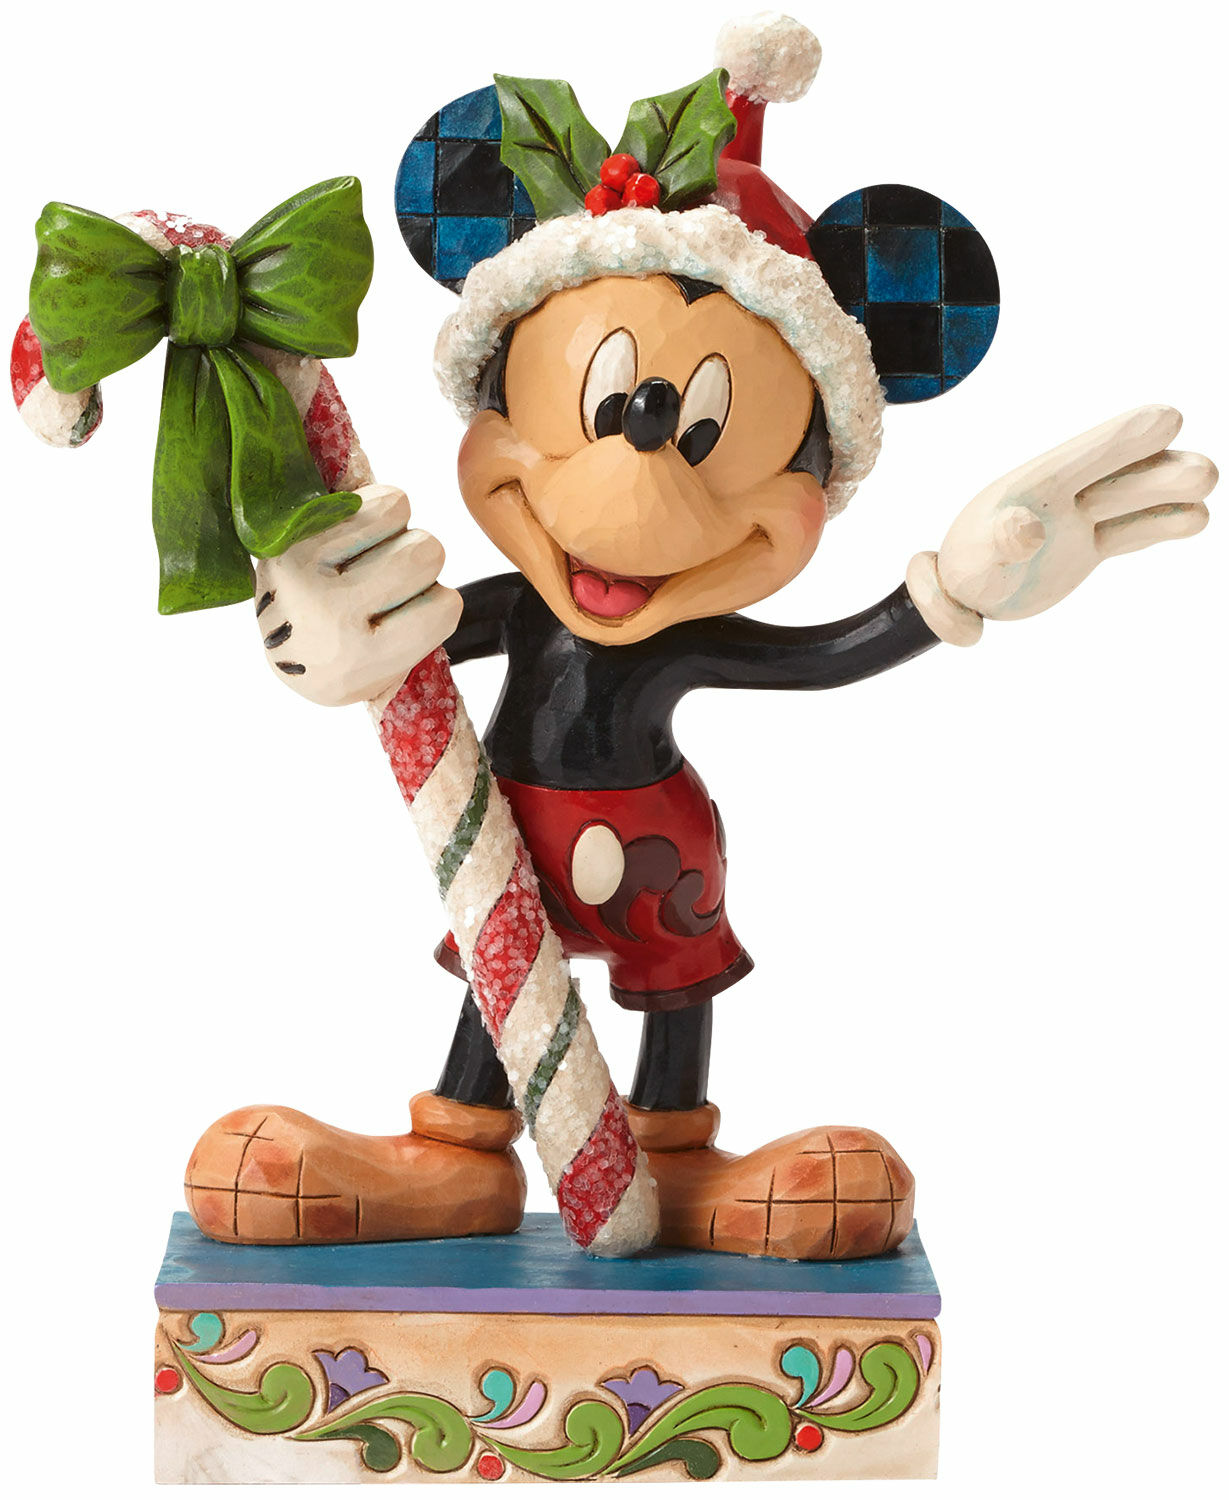 Sculpture "Mickey with Candy Cane", cast by Jim Shore